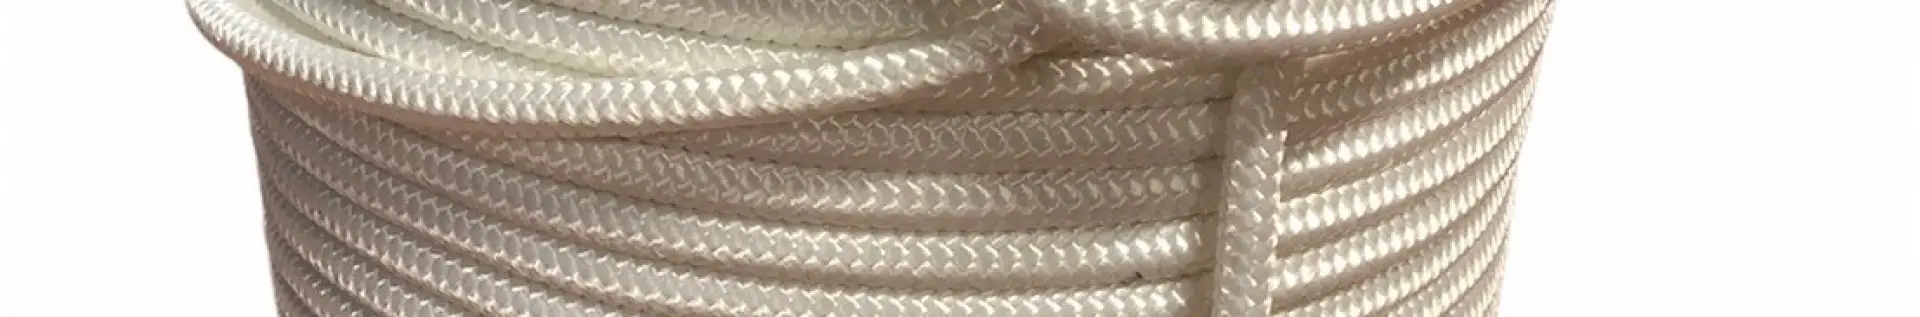 Polyester rope 8mm - Cod. TS08